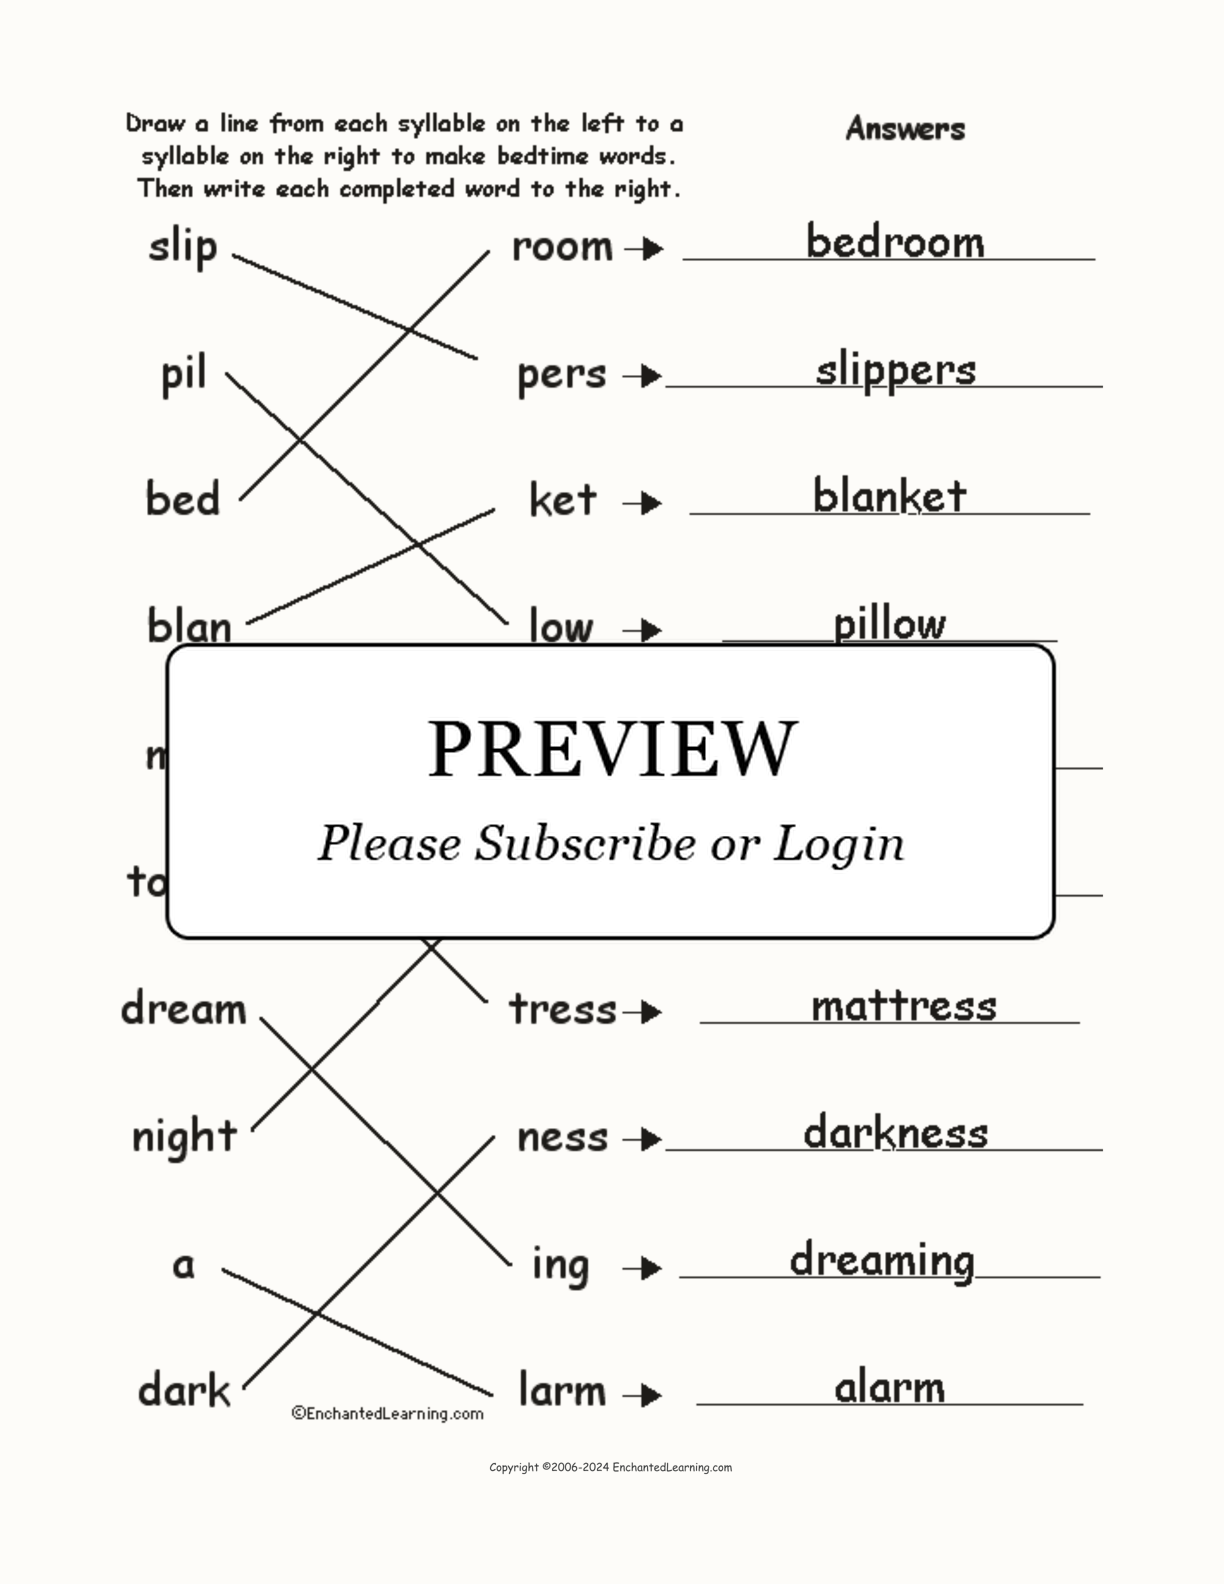 Match the Syllables: Bedtime Words interactive worksheet page 2